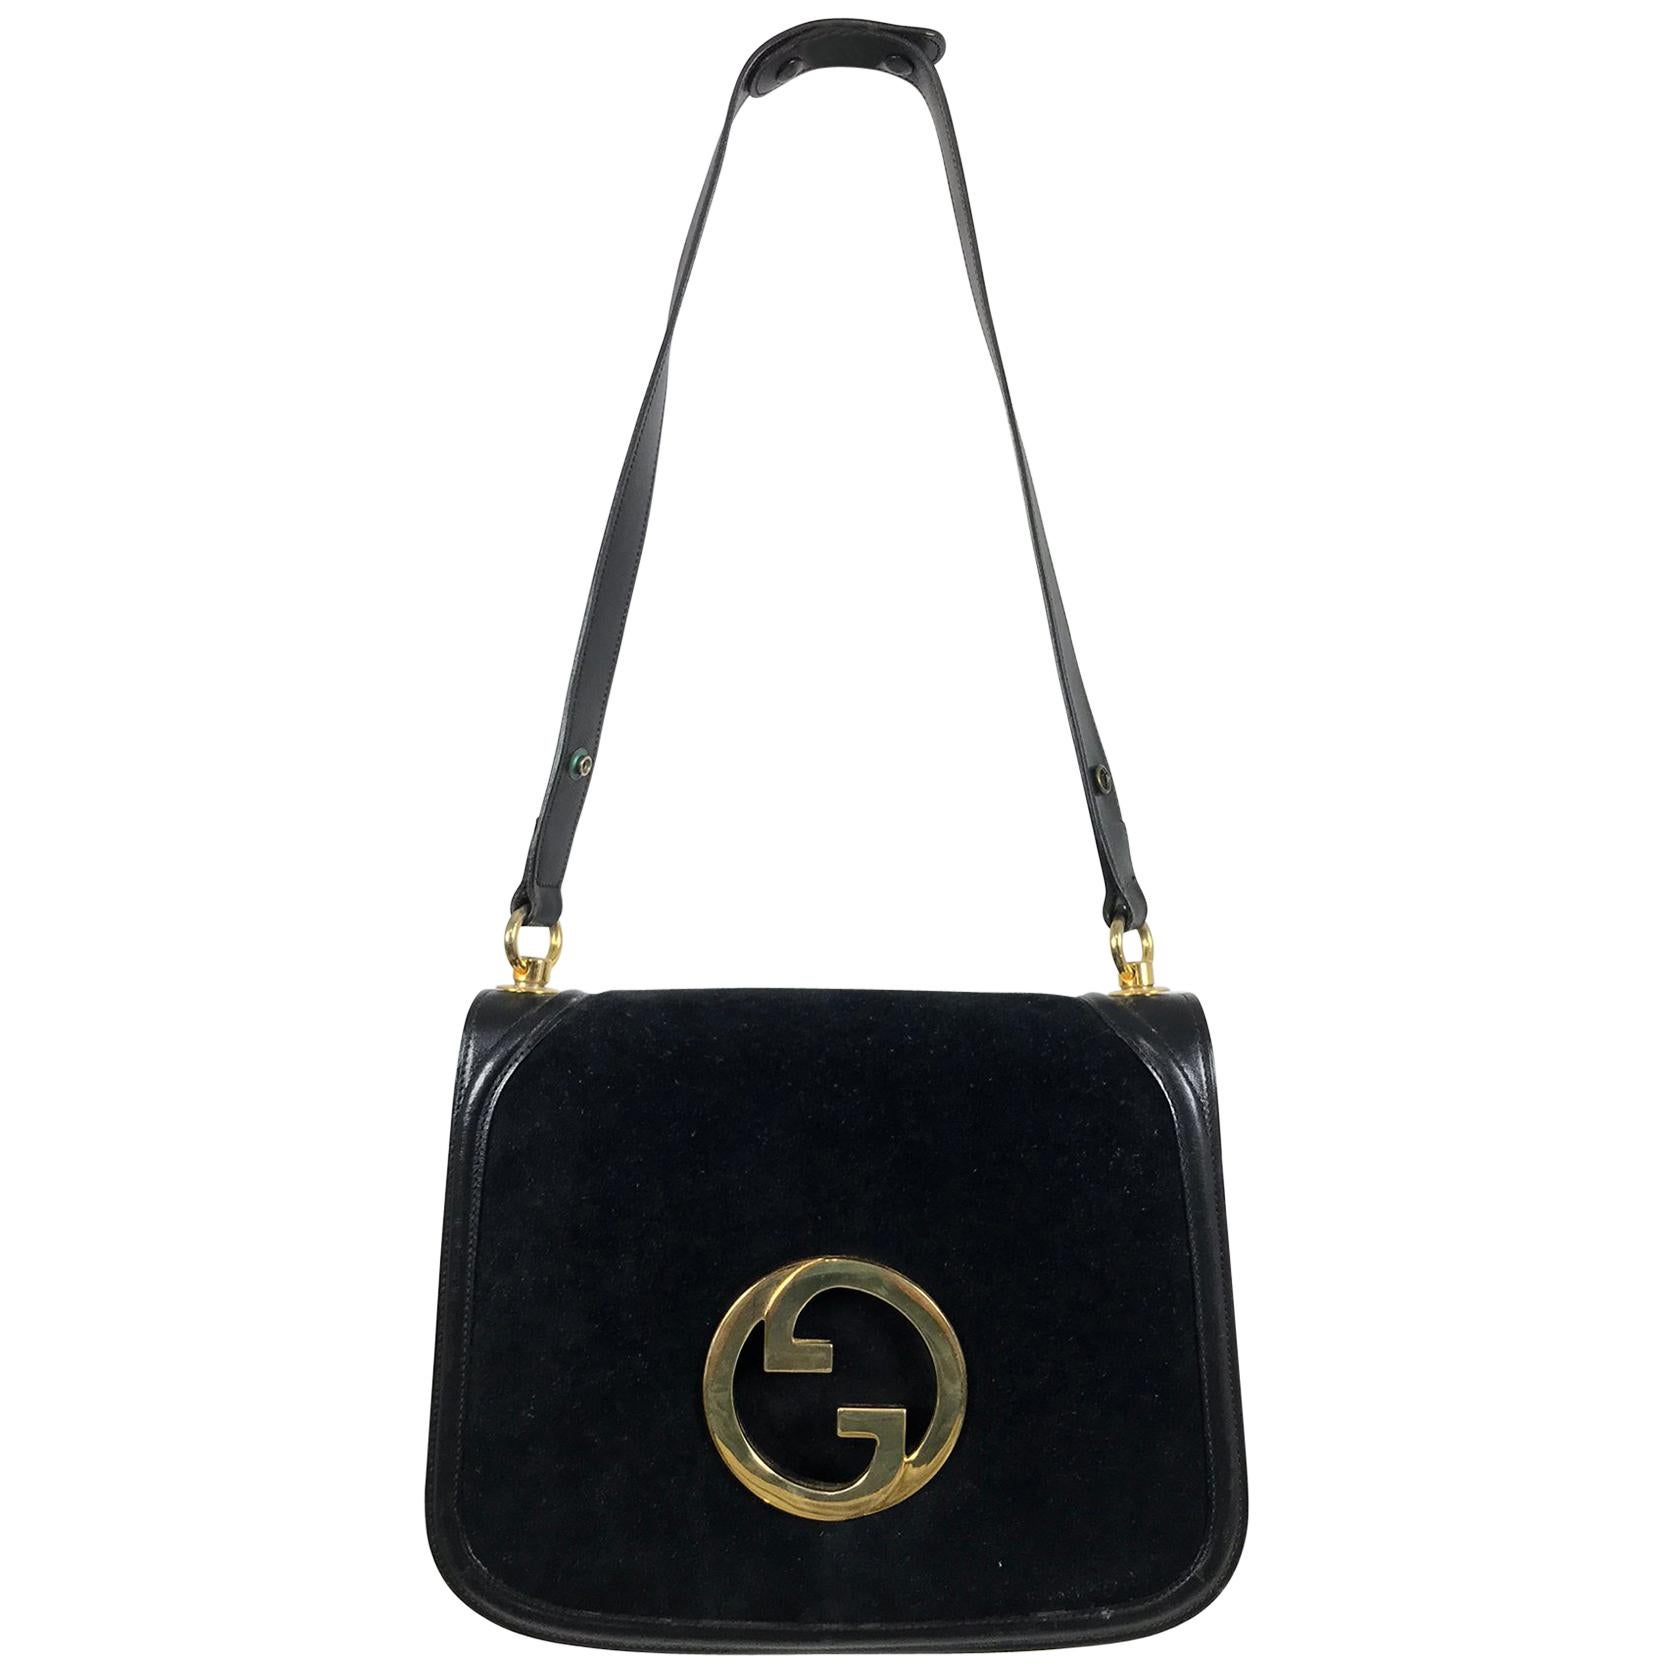 Gucci black suede and leather Blondie shoulder bag with gold hardware, 1970s 